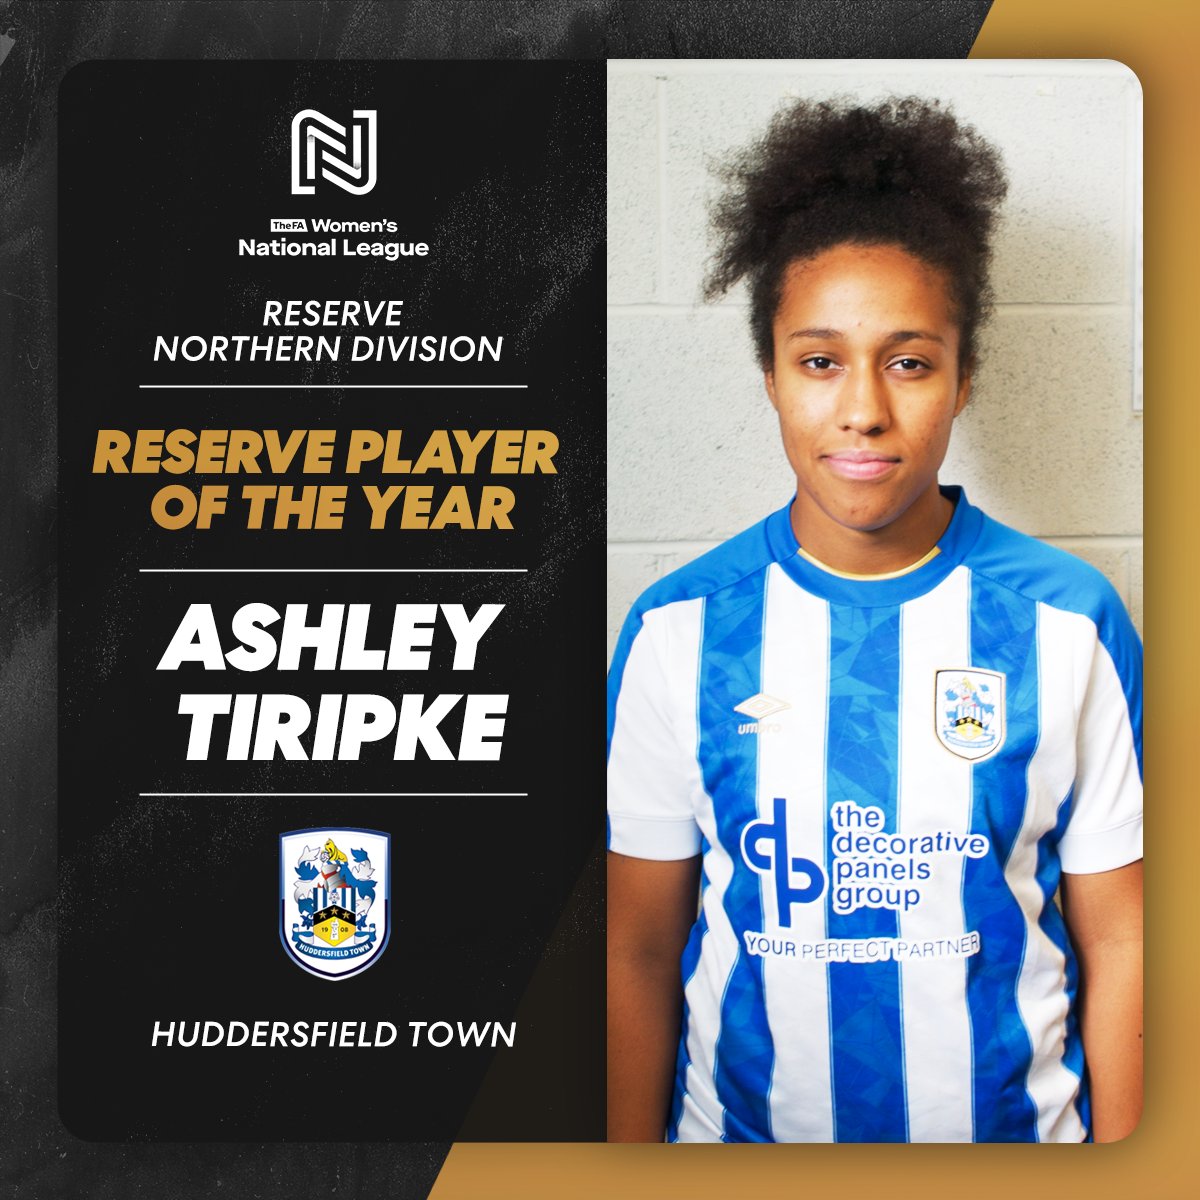 Reserve Northern Division Player of the Year ⭐️ Ashley Tiripke - Huddersfield Town #FAWNLAwards | @HTAFCWomen